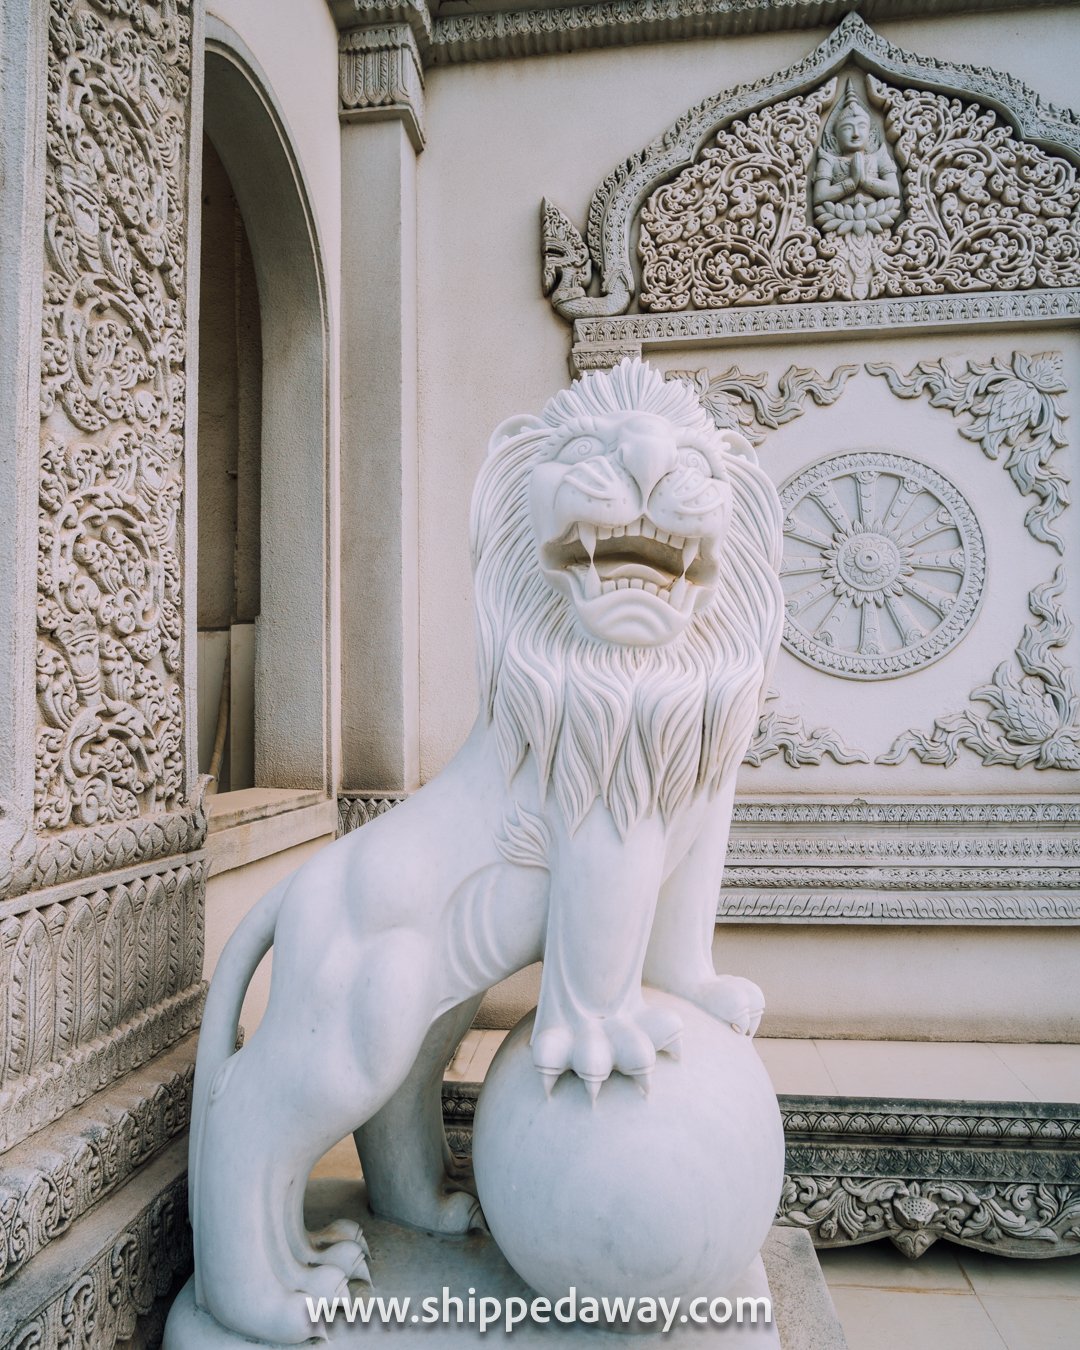 Lion statue at Buu Long Pagoda in Vietnam